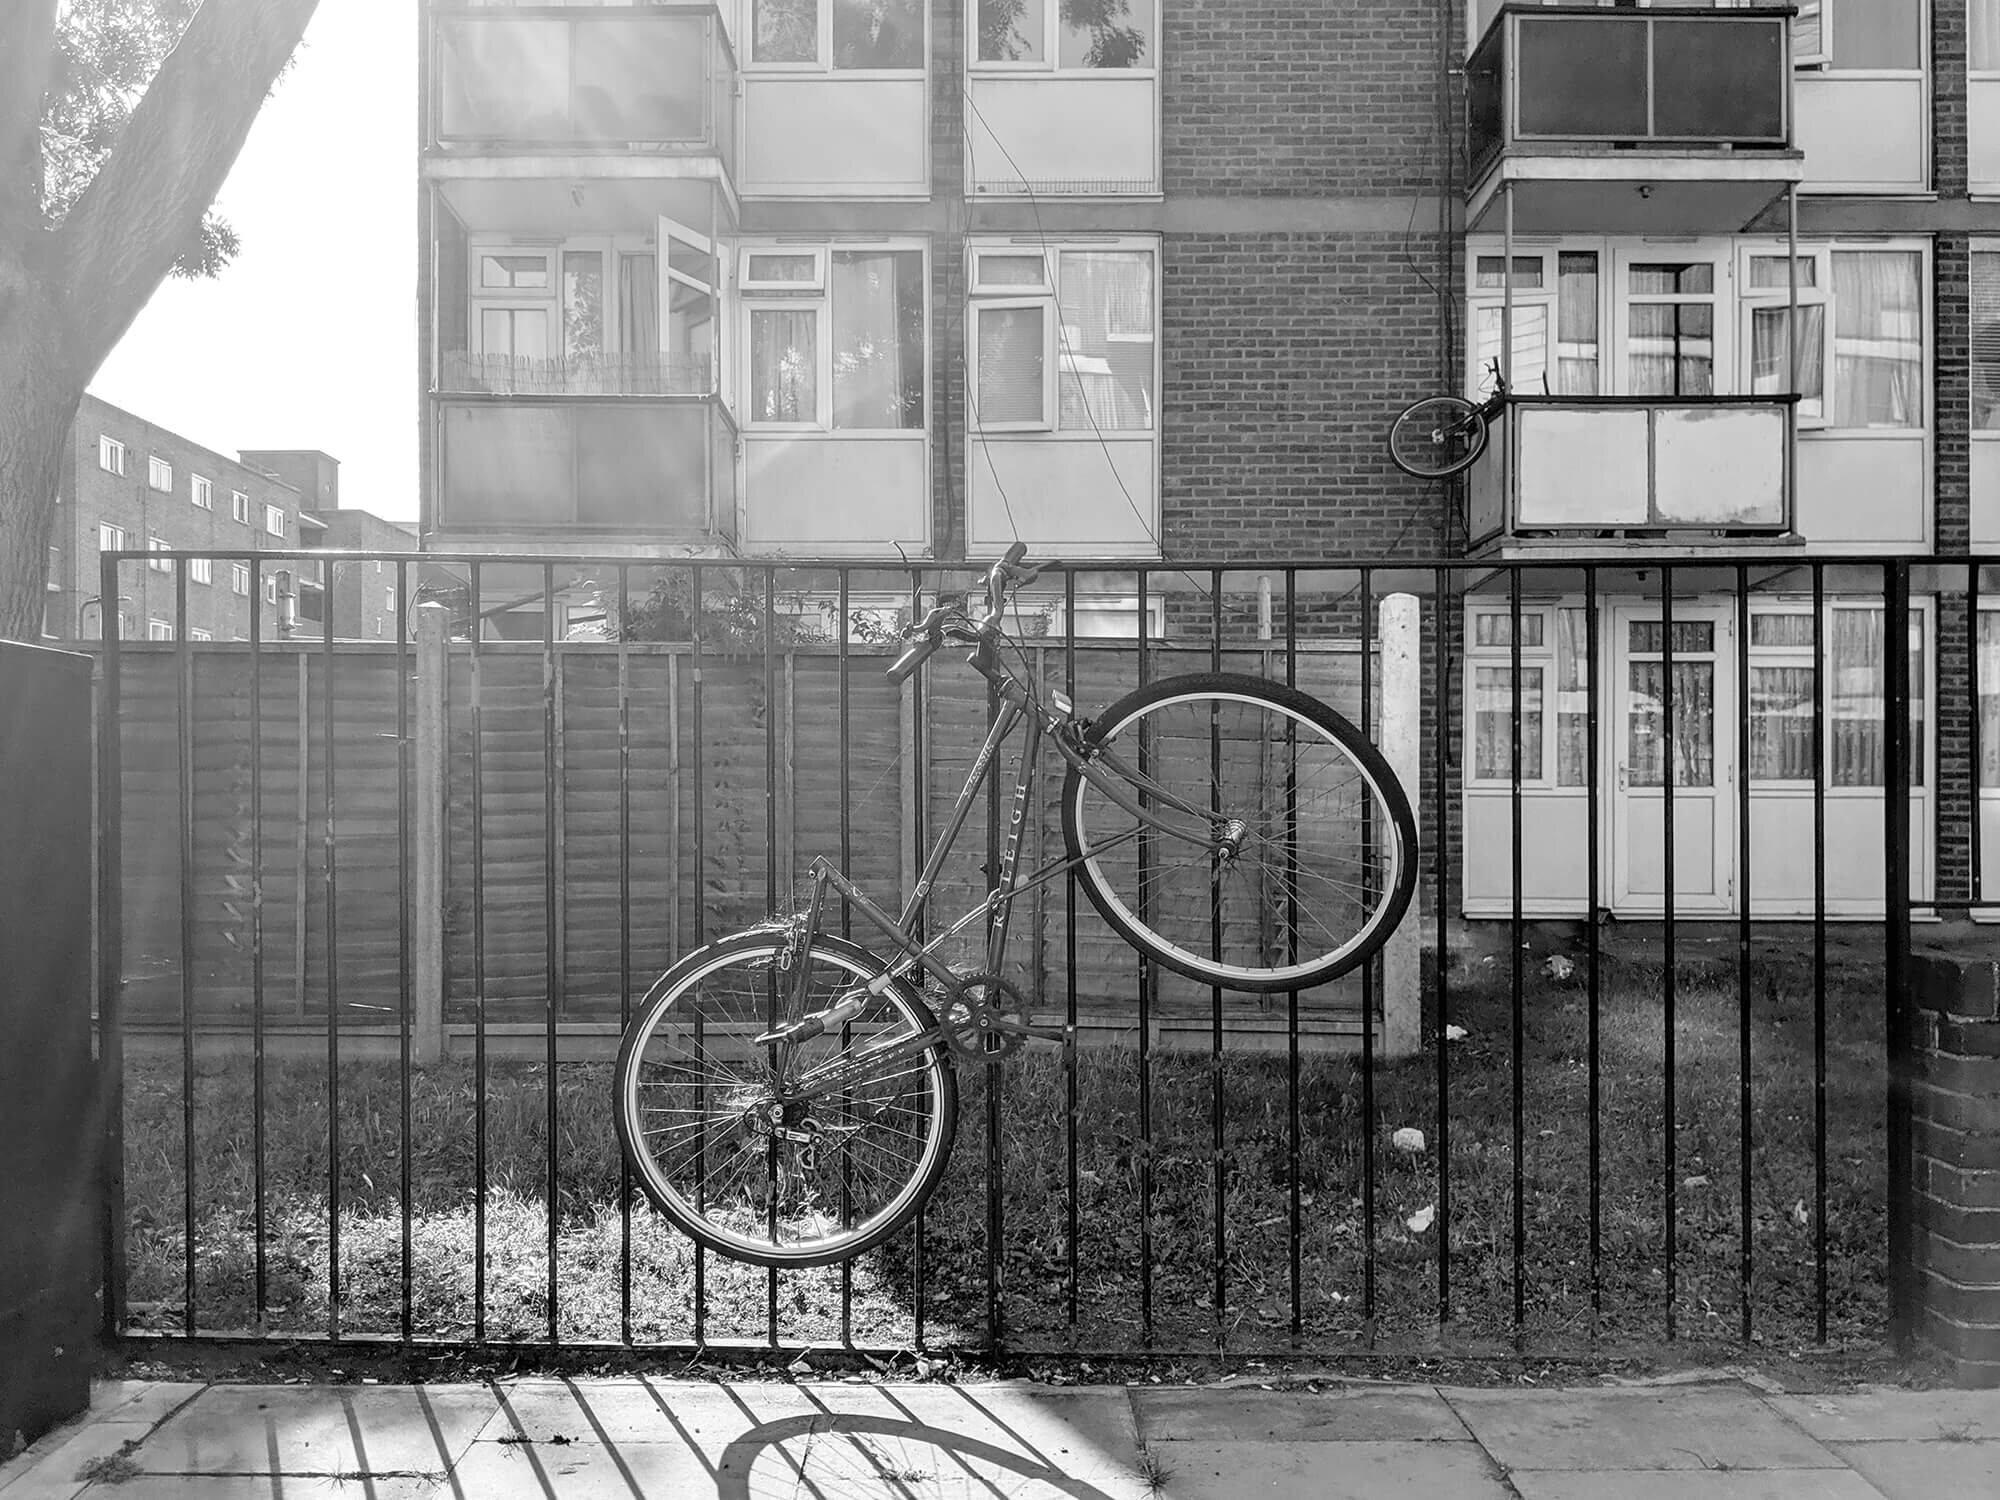 Bike chained on metal fence, with sun shining from behind.